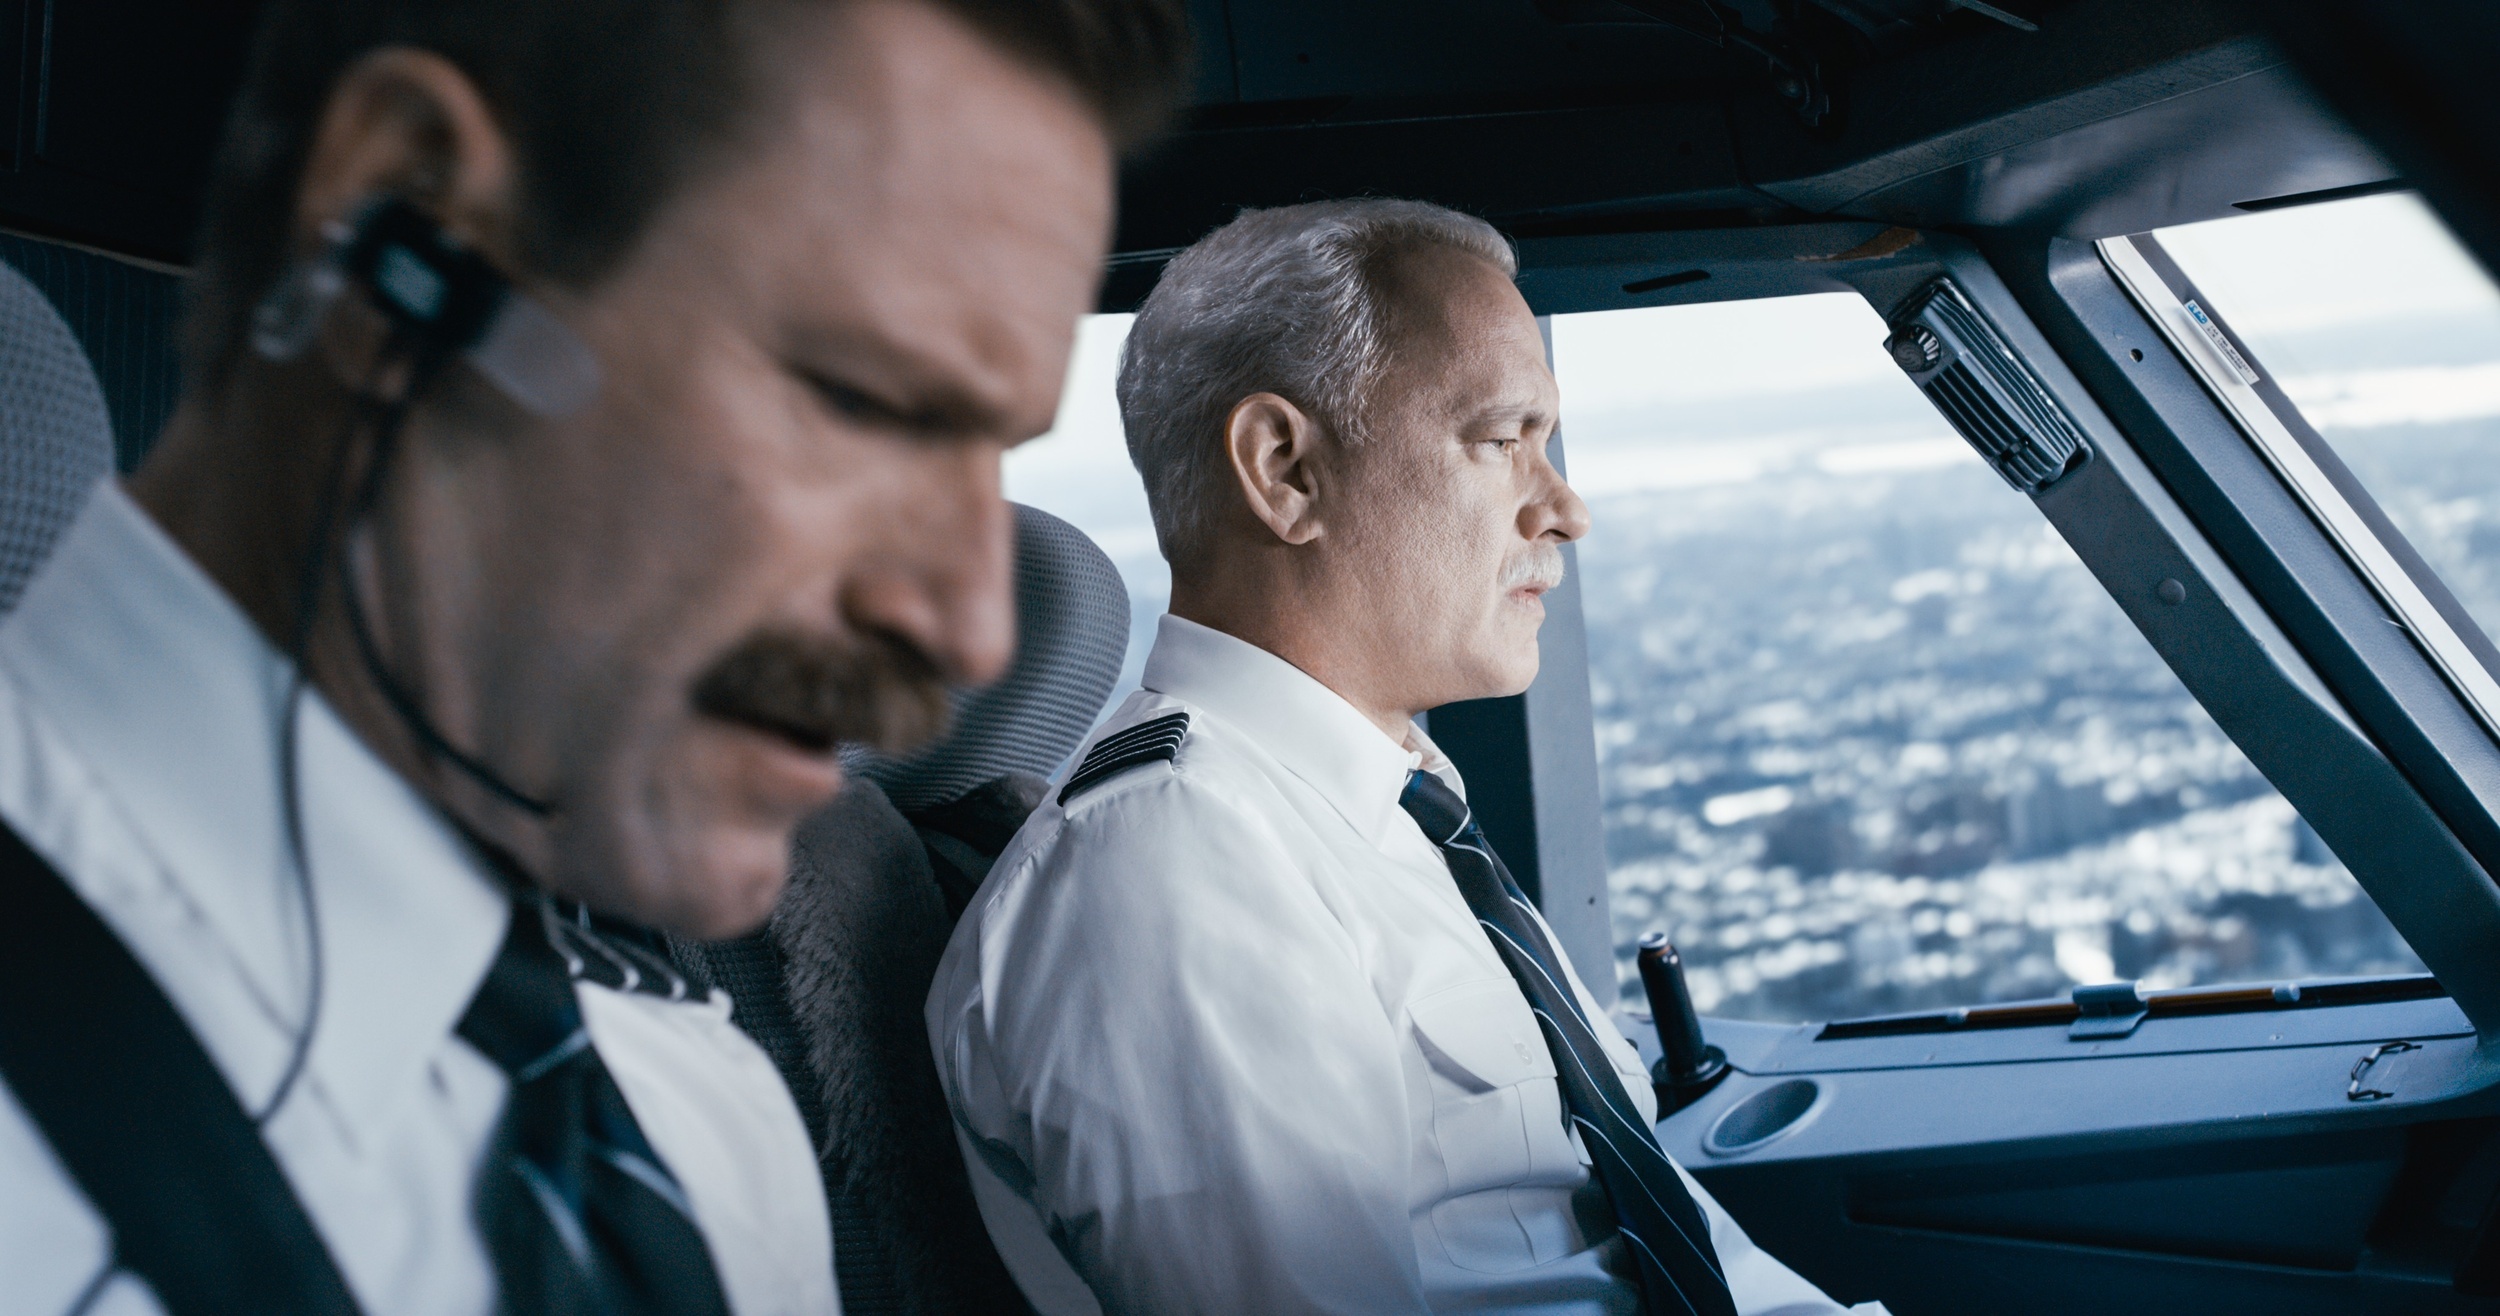 <p>Clint Eastwood directs a Tom Hanks movie wherein Hanks plays a heroic pilot. A pilot named Chesley “Sully” Sullenberger, at that. It’s Eastwood, which is to say, straightforward and to the point. However, that isn’t a bad thing. Many people talk highly of “Sully” as the kind of quality adult drama that doesn’t get made all that often anymore.</p><p>You may also like: <a href='https://www.yardbarker.com/entertainment/articles/the_most_controversial_moments_cma_awards_history/s1__27716366'>The most controversial moments CMA Awards history</a></p>